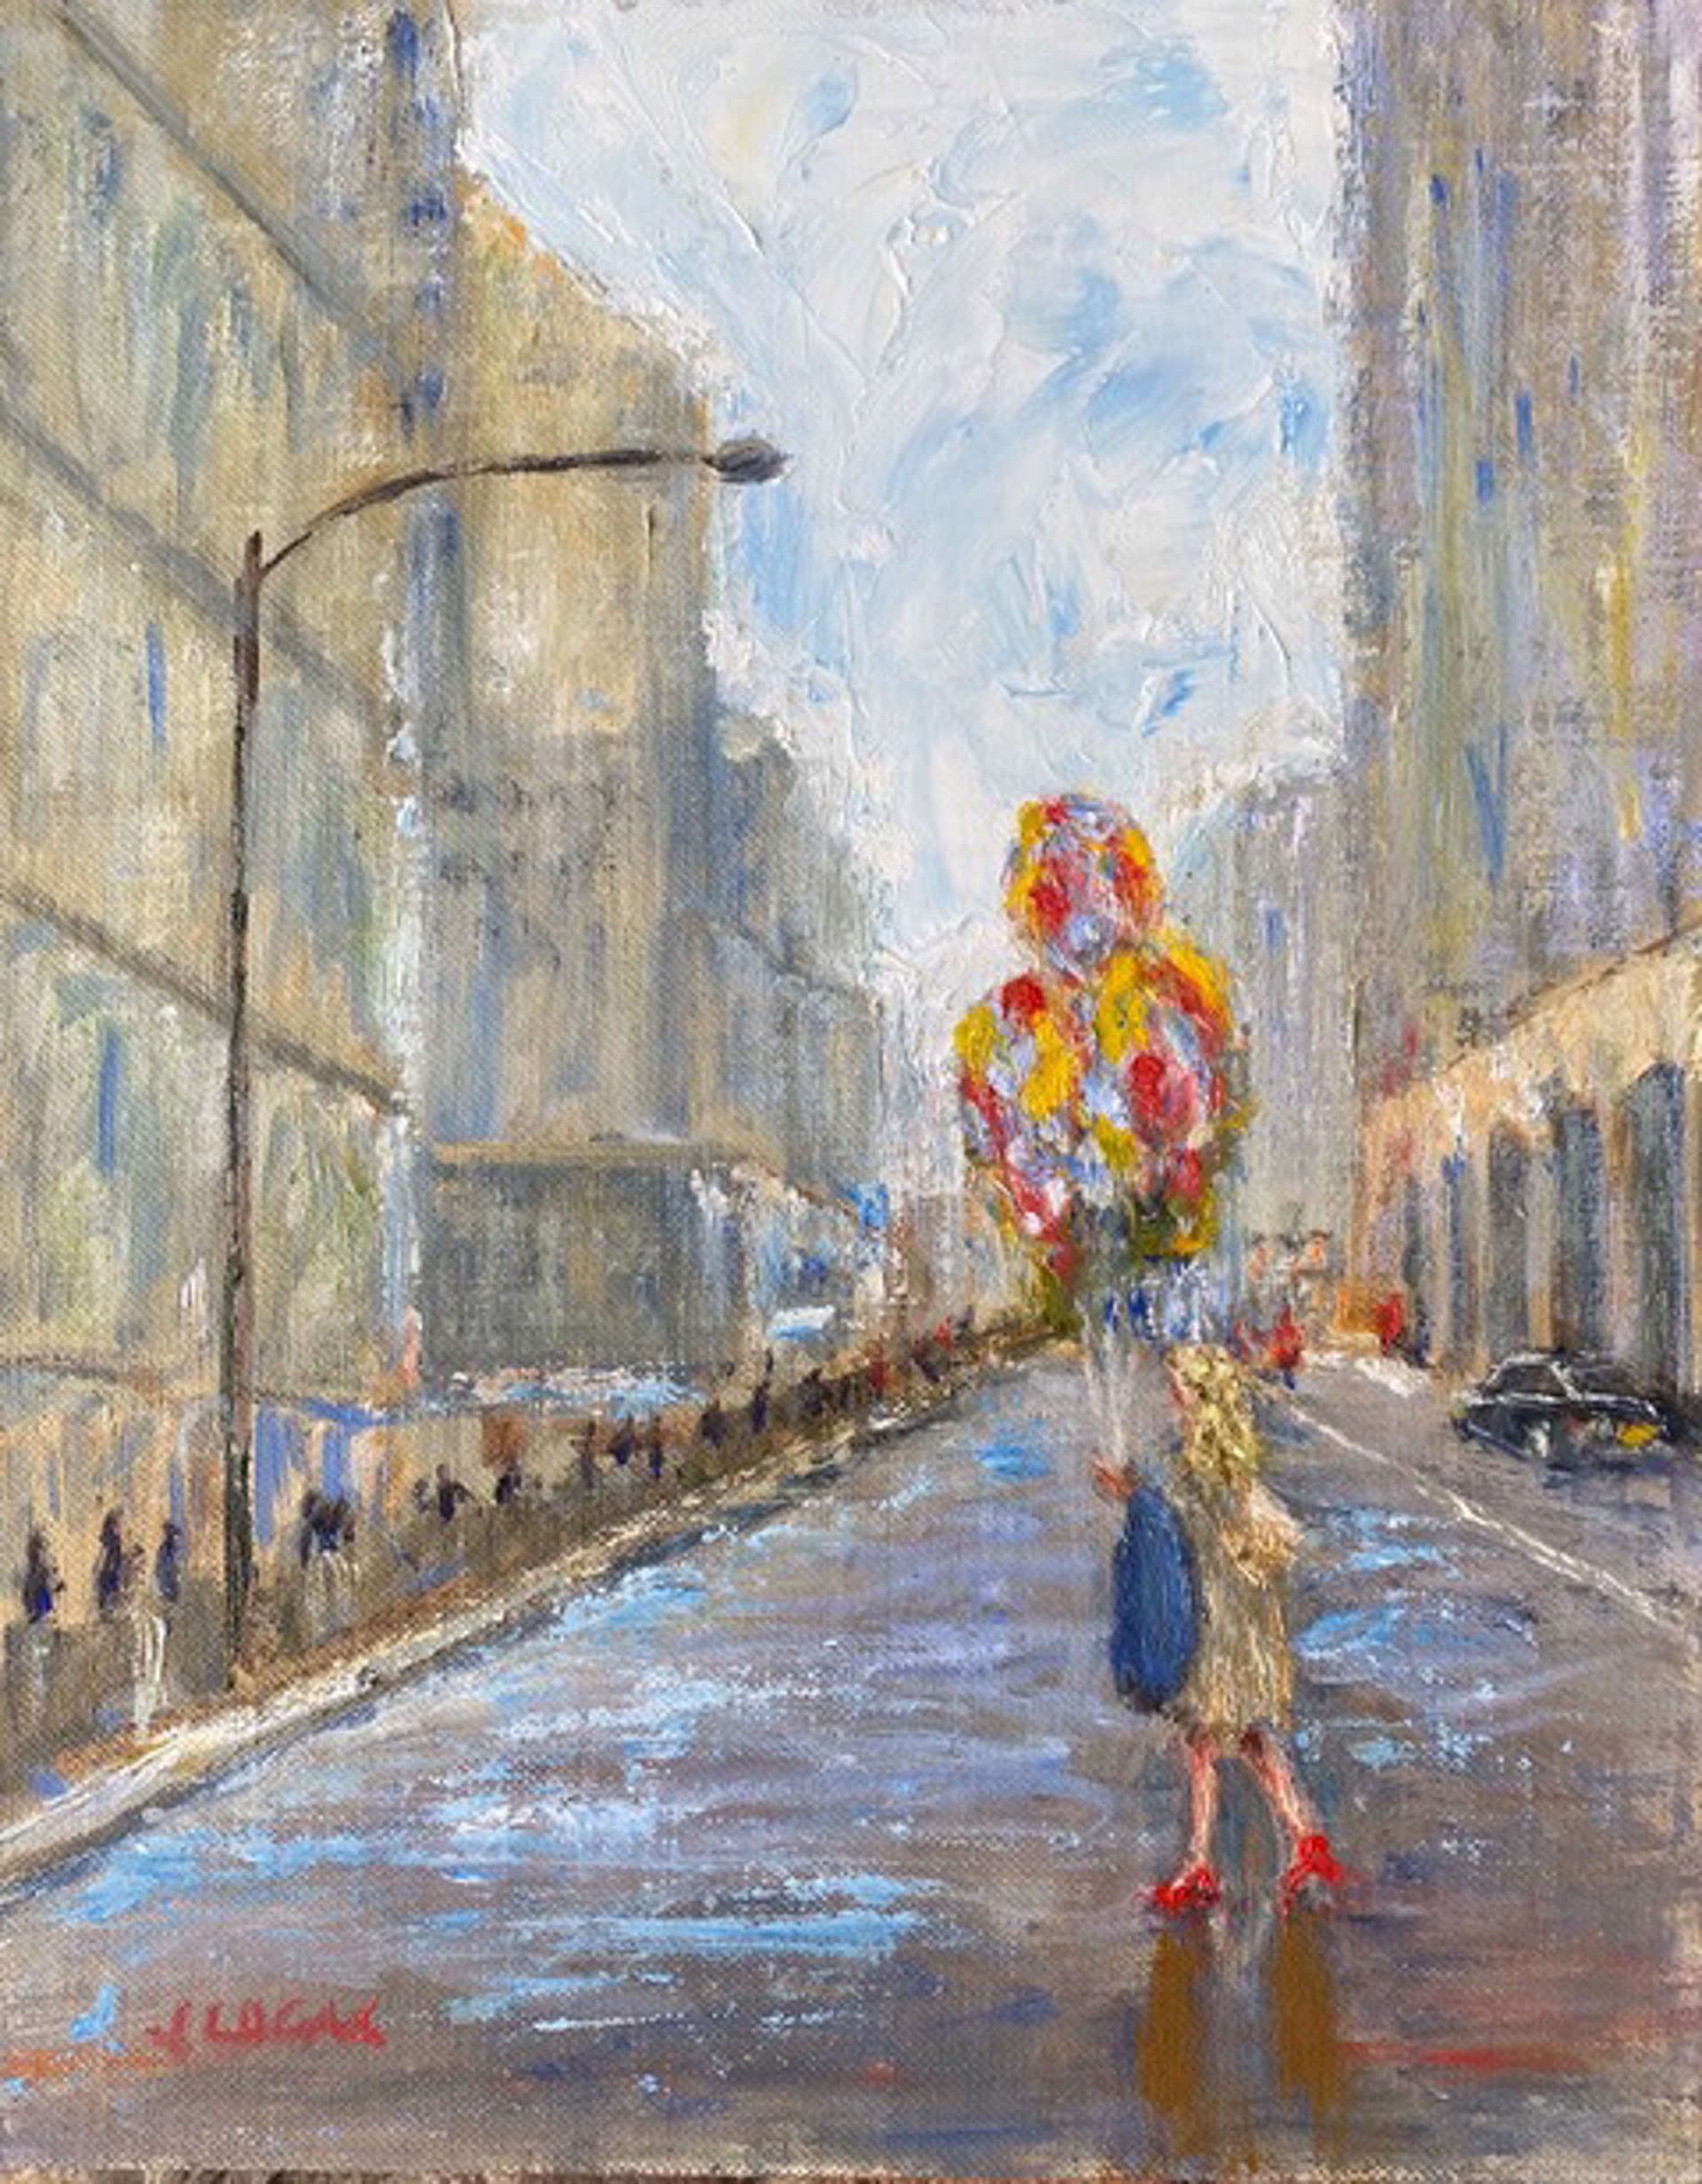 Girl with the Red Shoes in NYC by Janet Lucas Beck